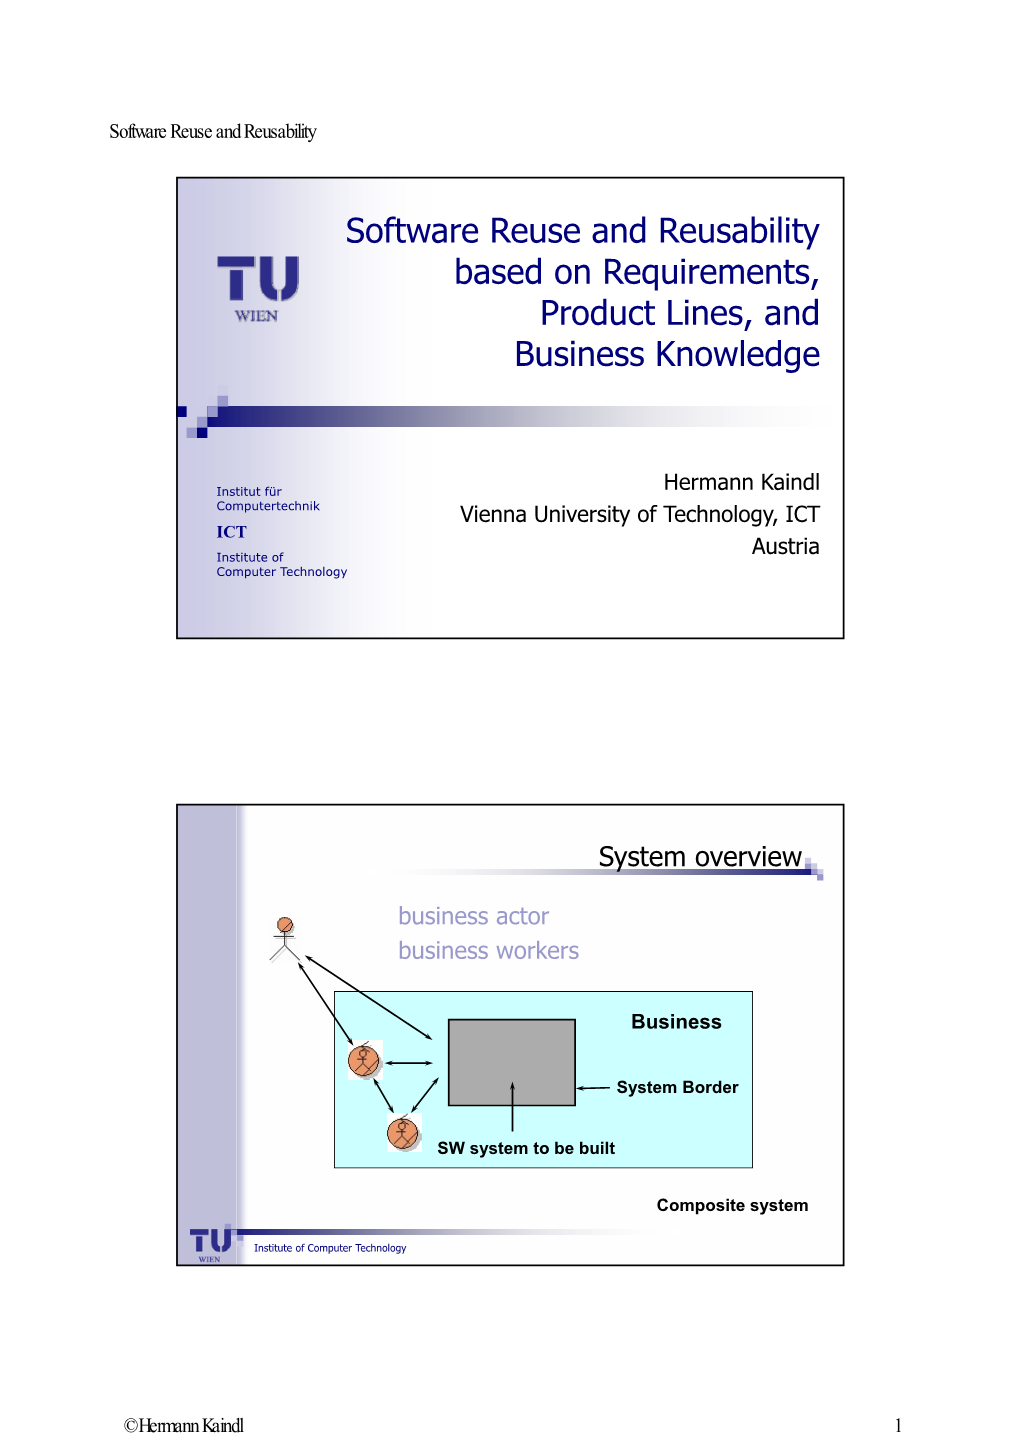 Software Reuse and Reusability Based on Requirements, Product Lines, and Business Knowledge